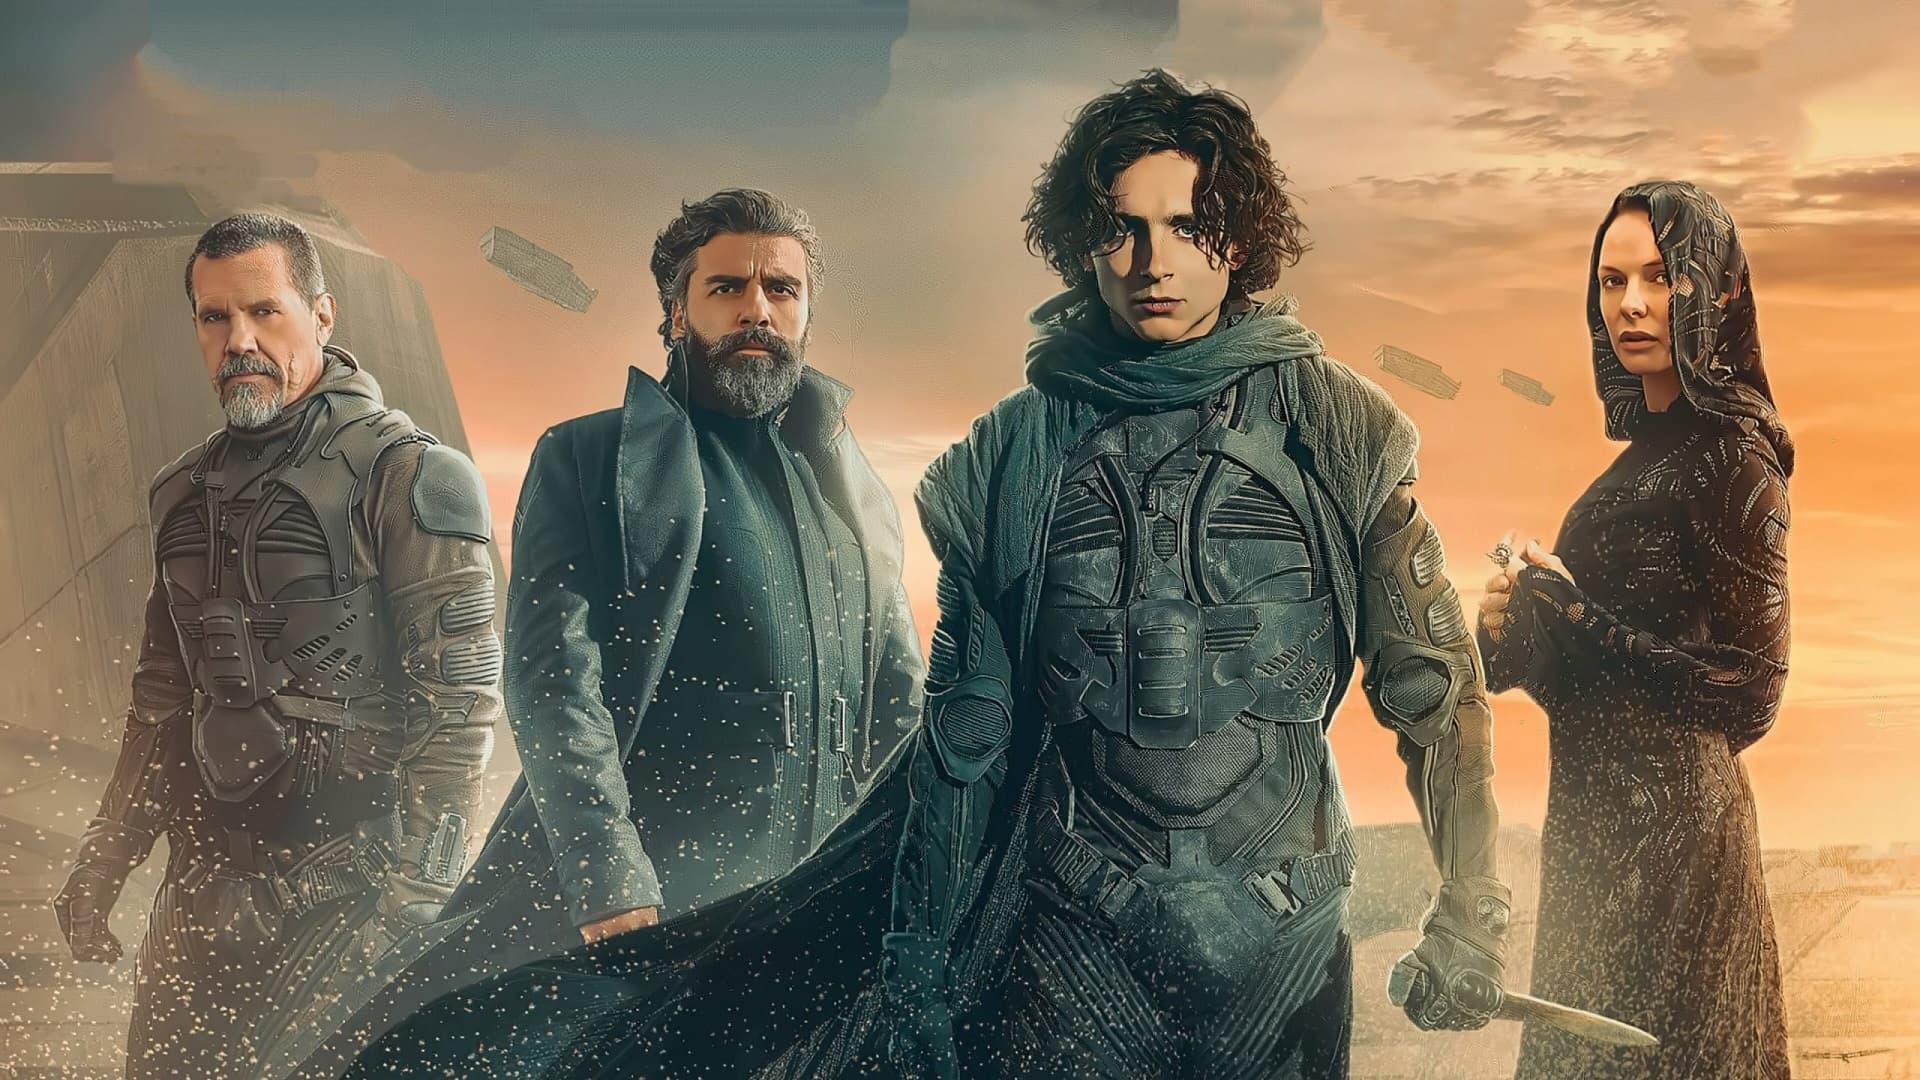 The movie Dune hit theaters How to watch it for free on HBO Max?